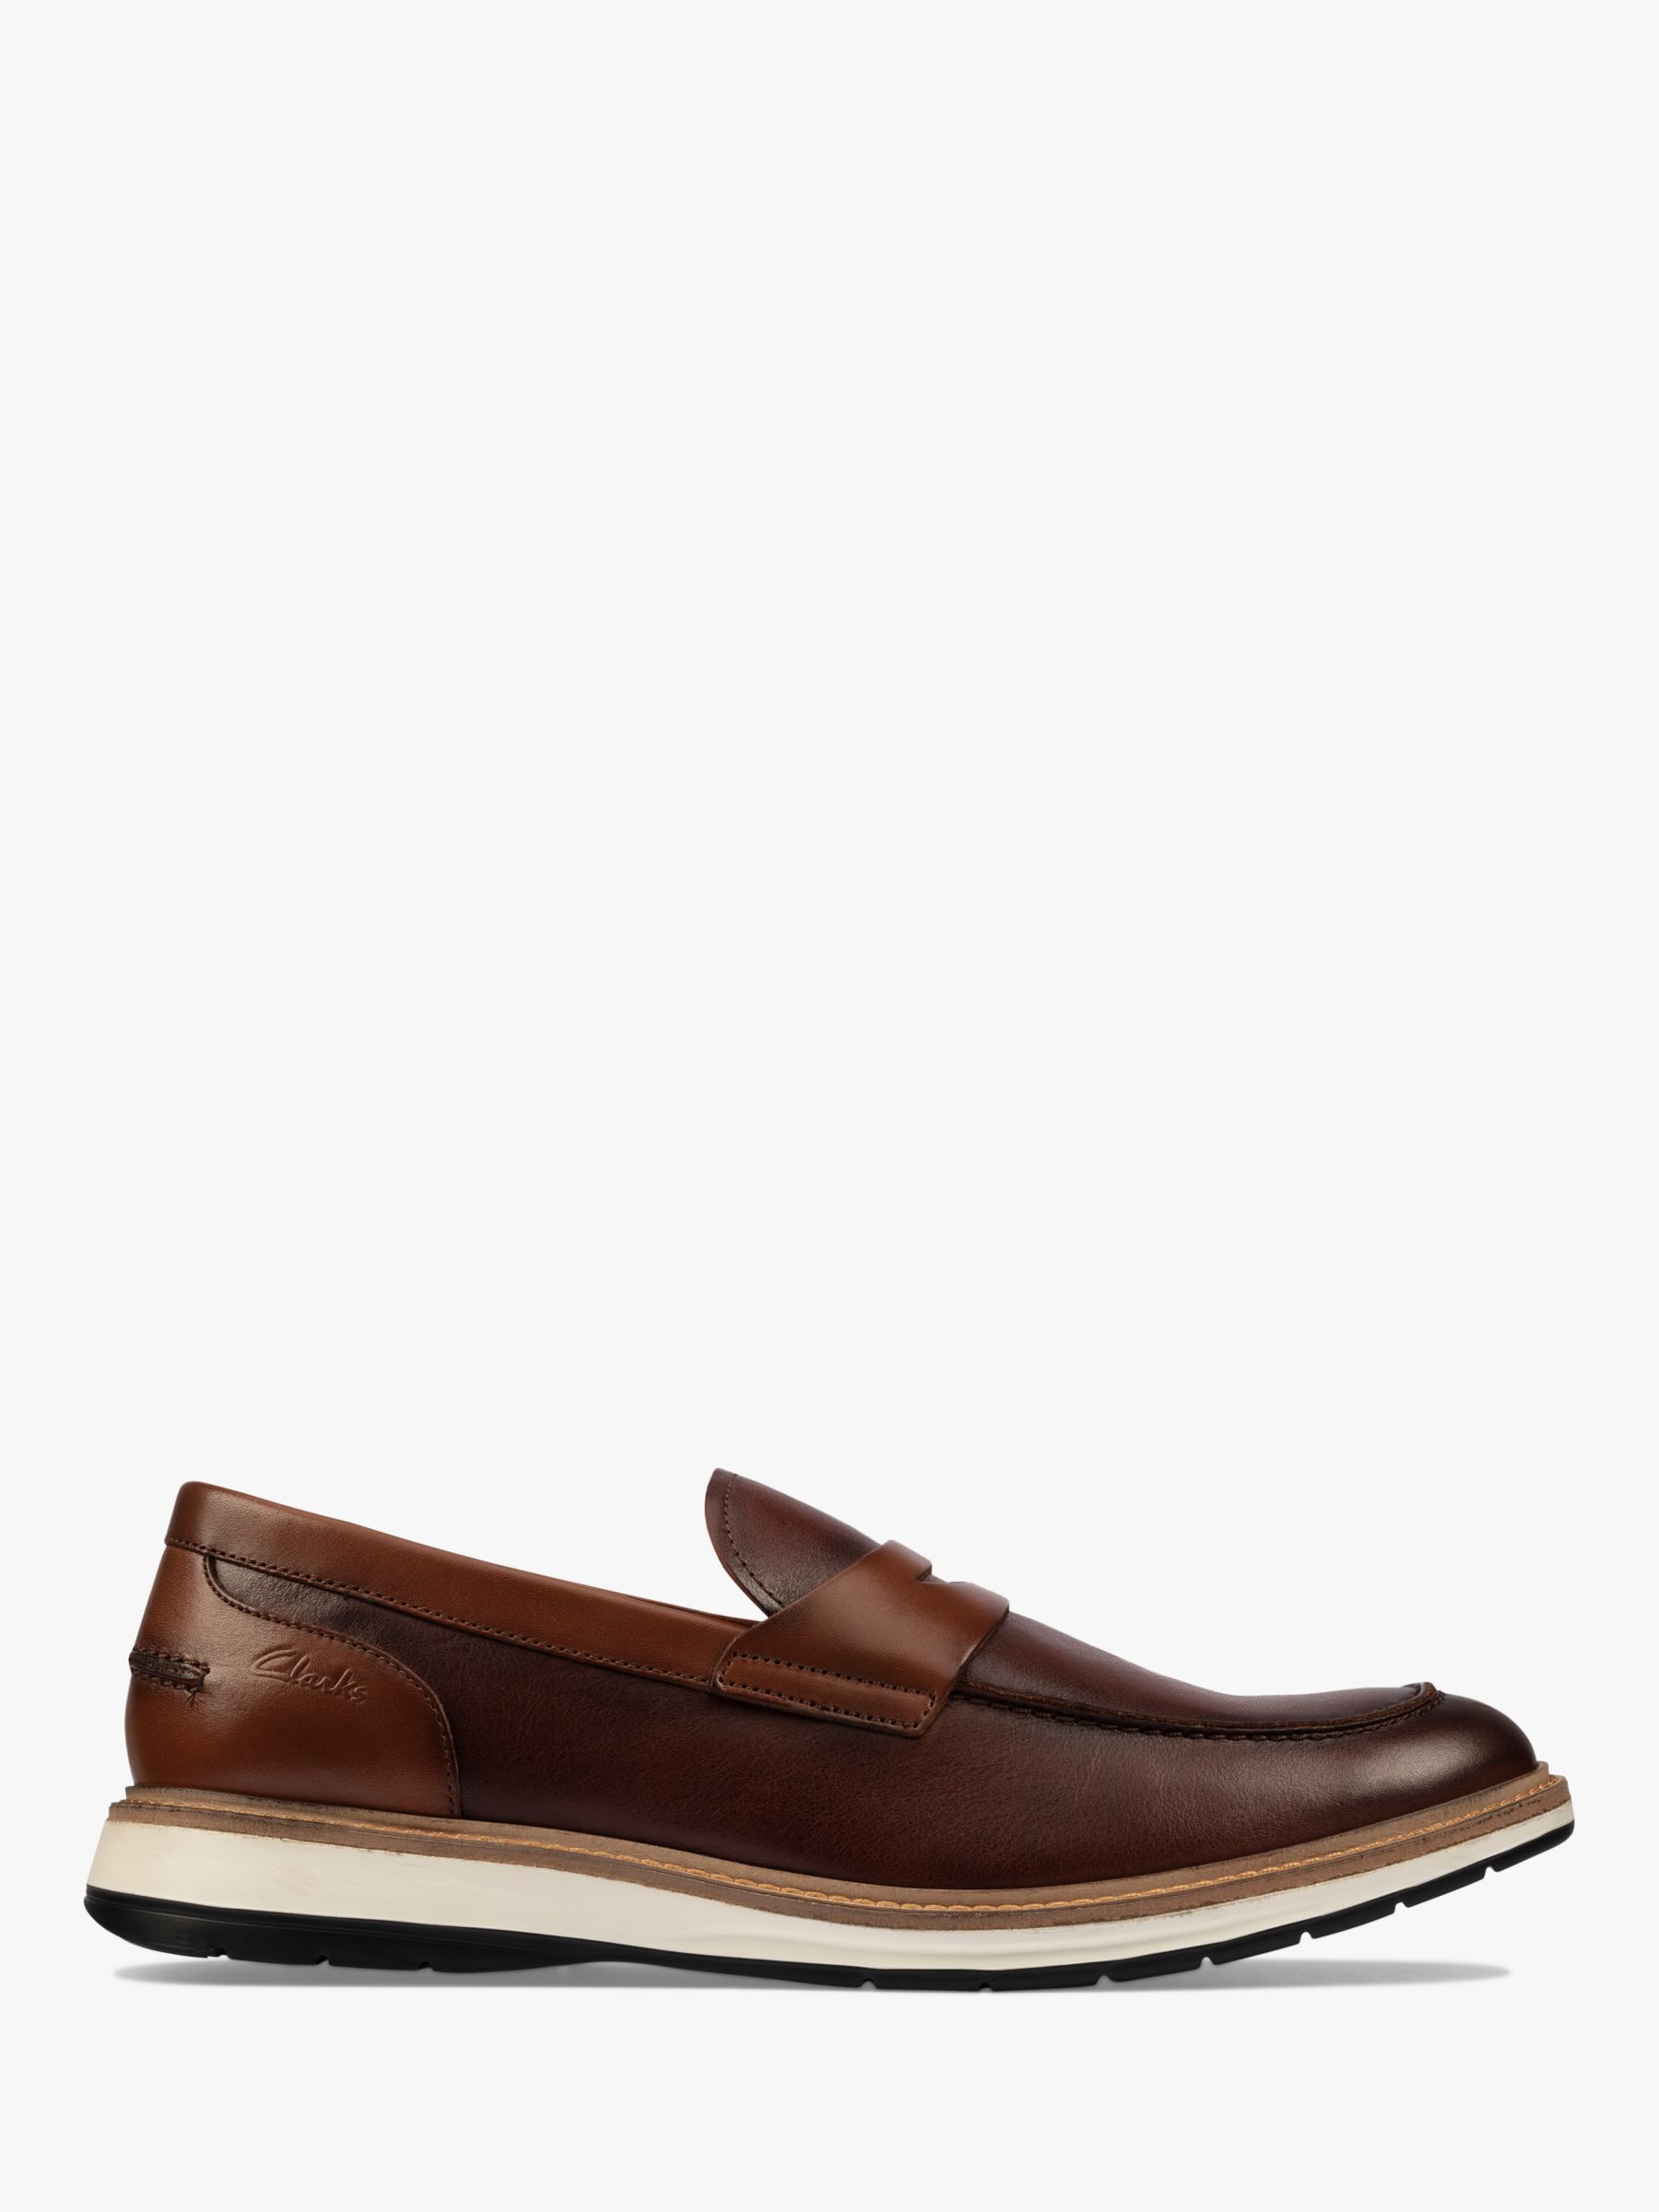 Clarks Chantry Leather Penny Loafers, Tan at John Lewis & Partners